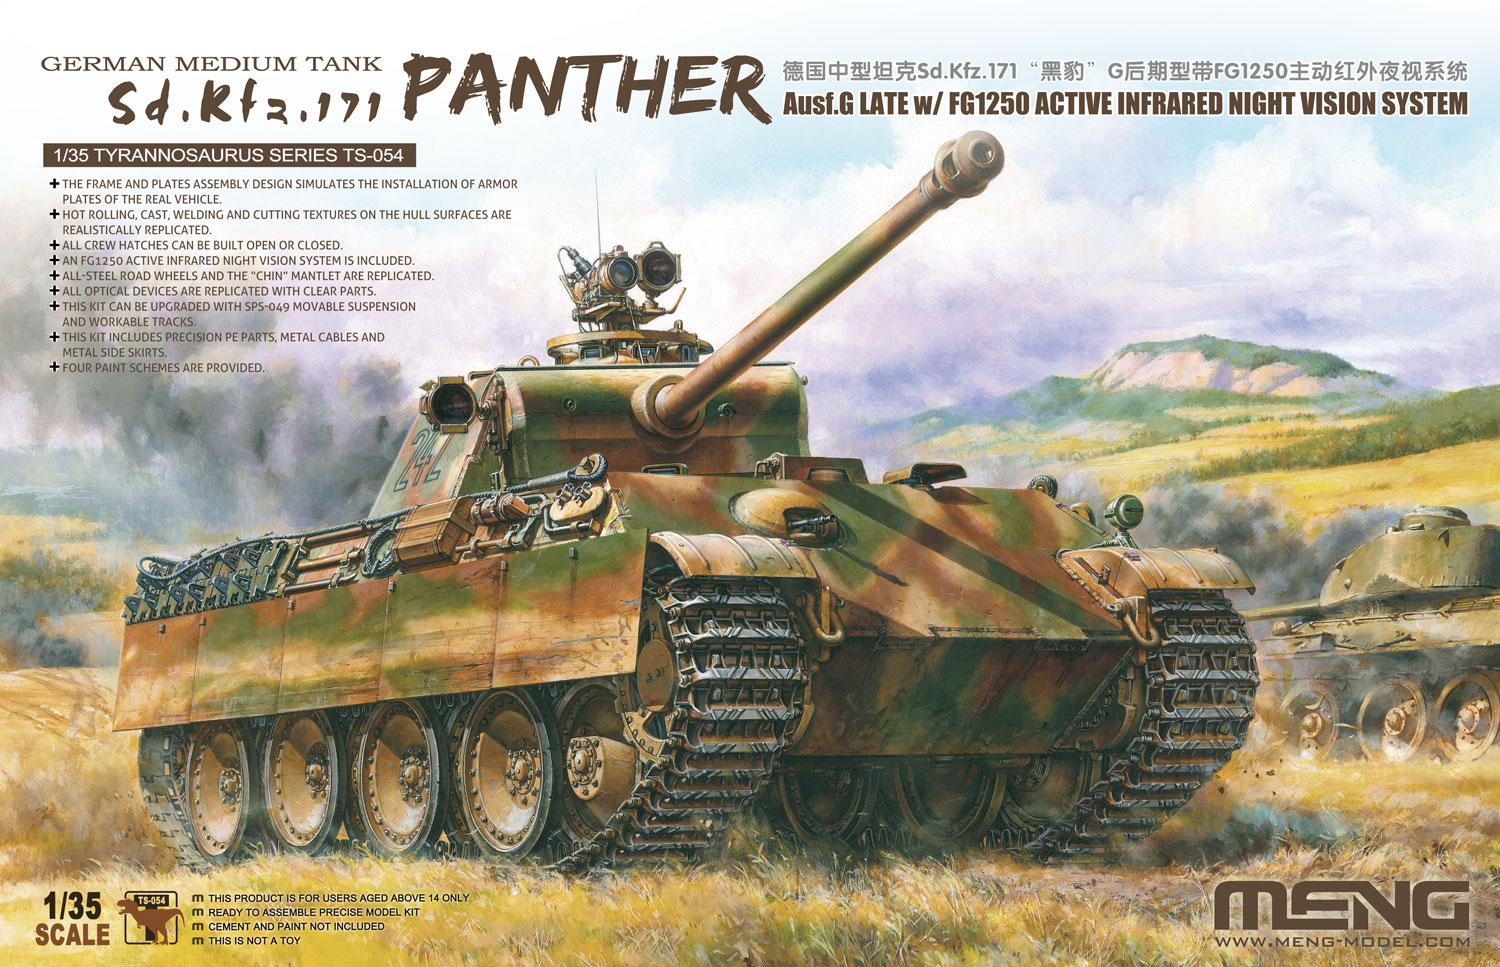 Fotografie 1/35 Panther Ausf.G Late w/ FG1250 Active Infrared Night Vision System